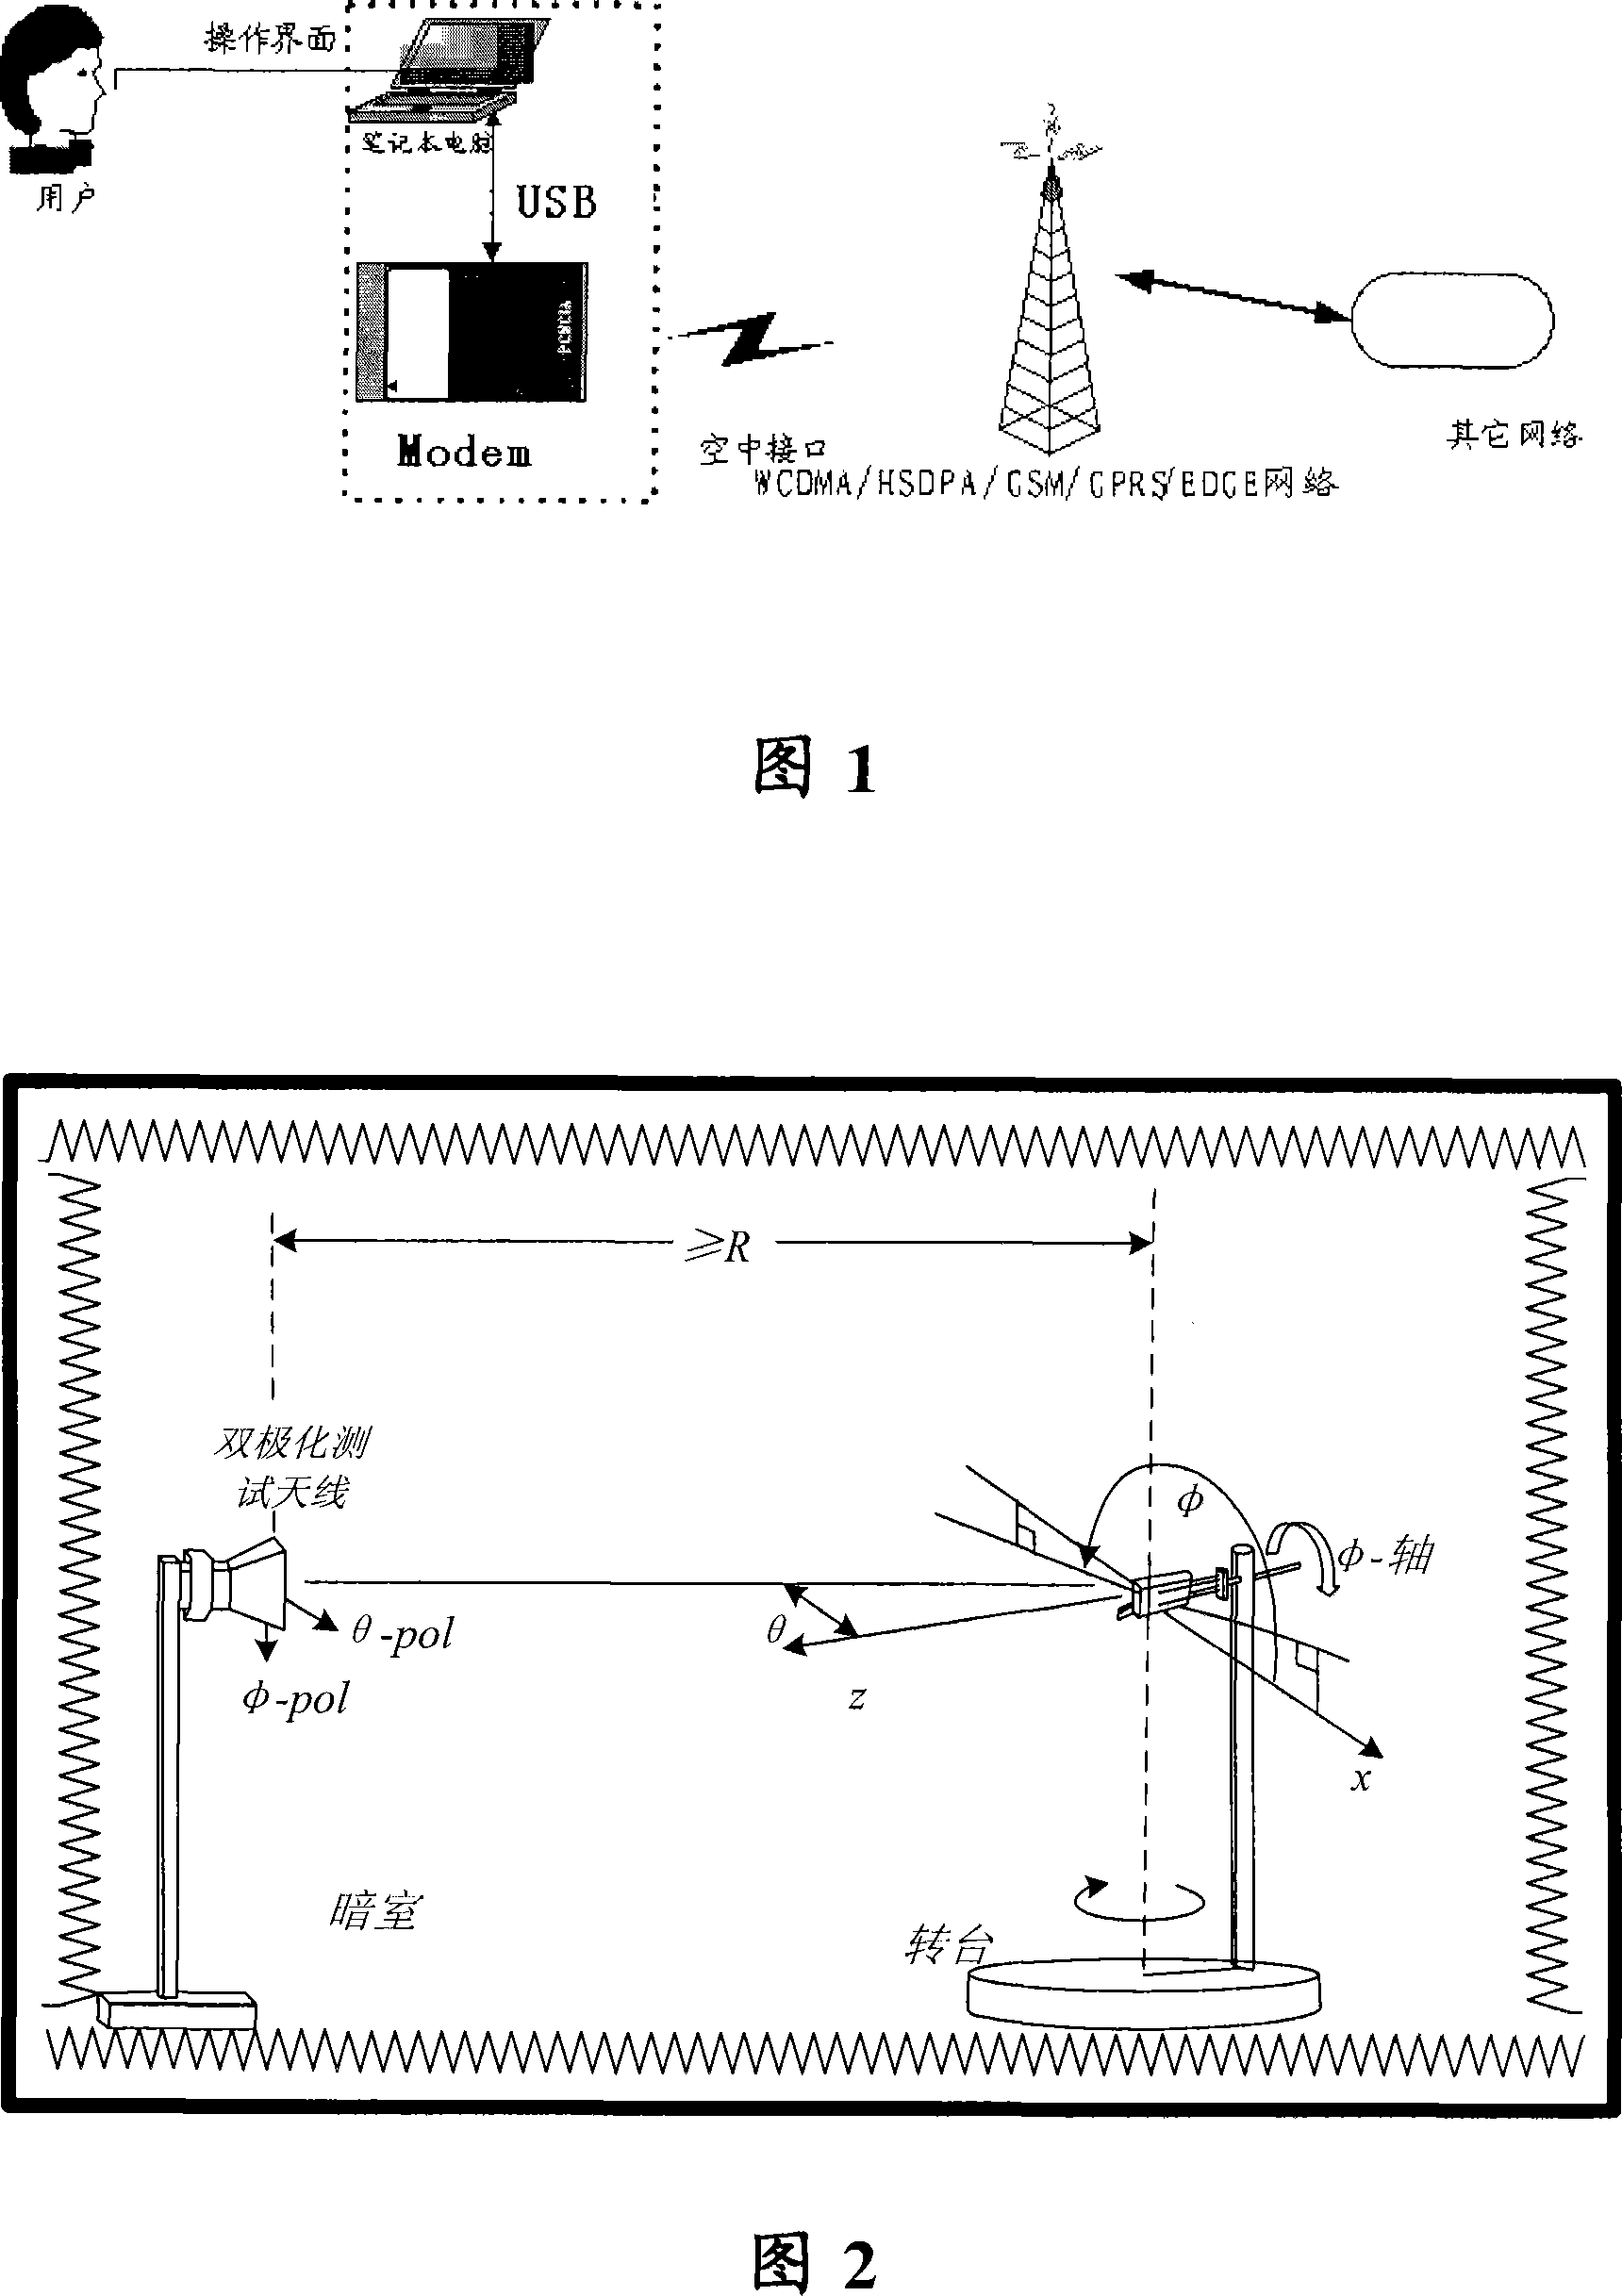 A test system and test method on aerial performance of wireless USB modem